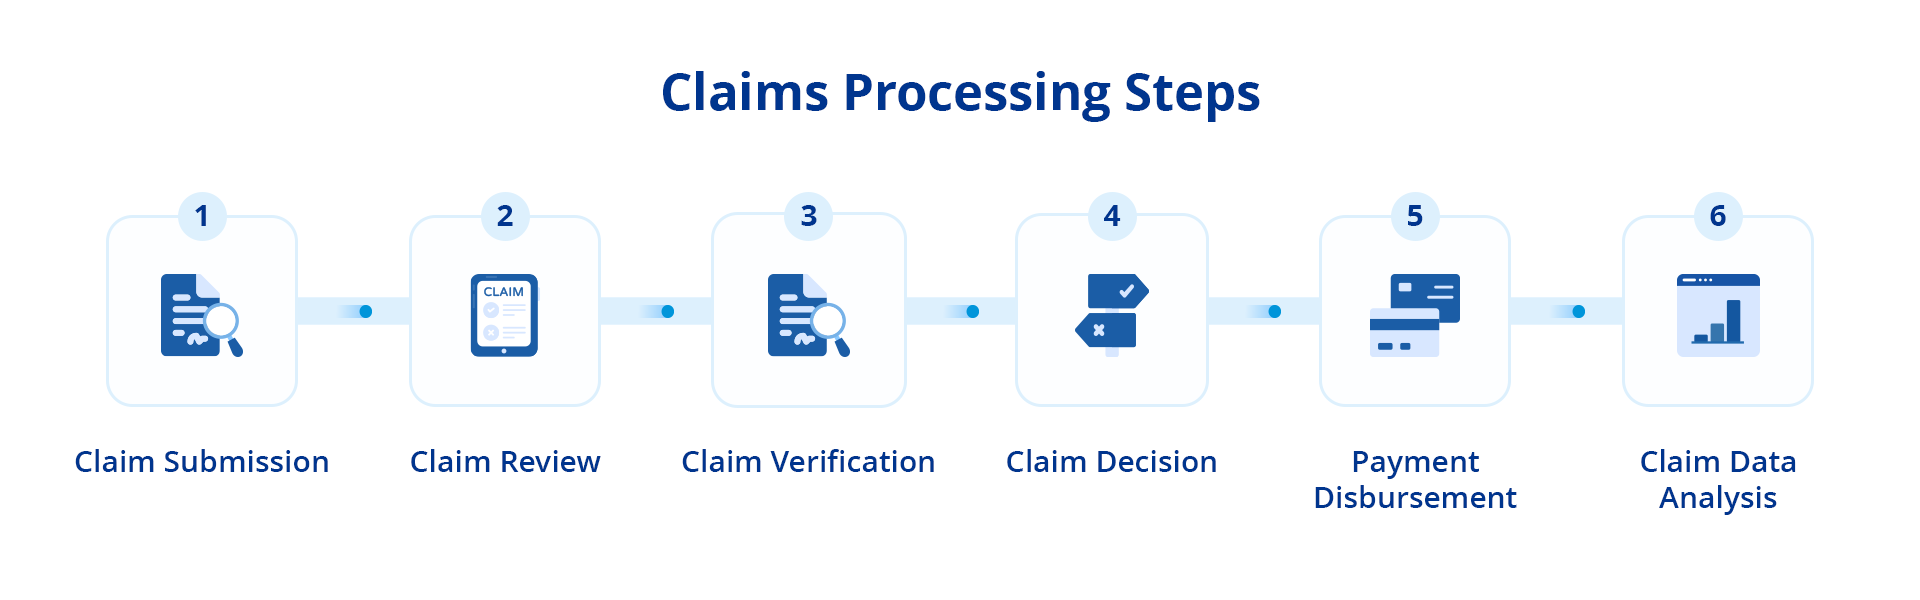 Claims Processing Steps